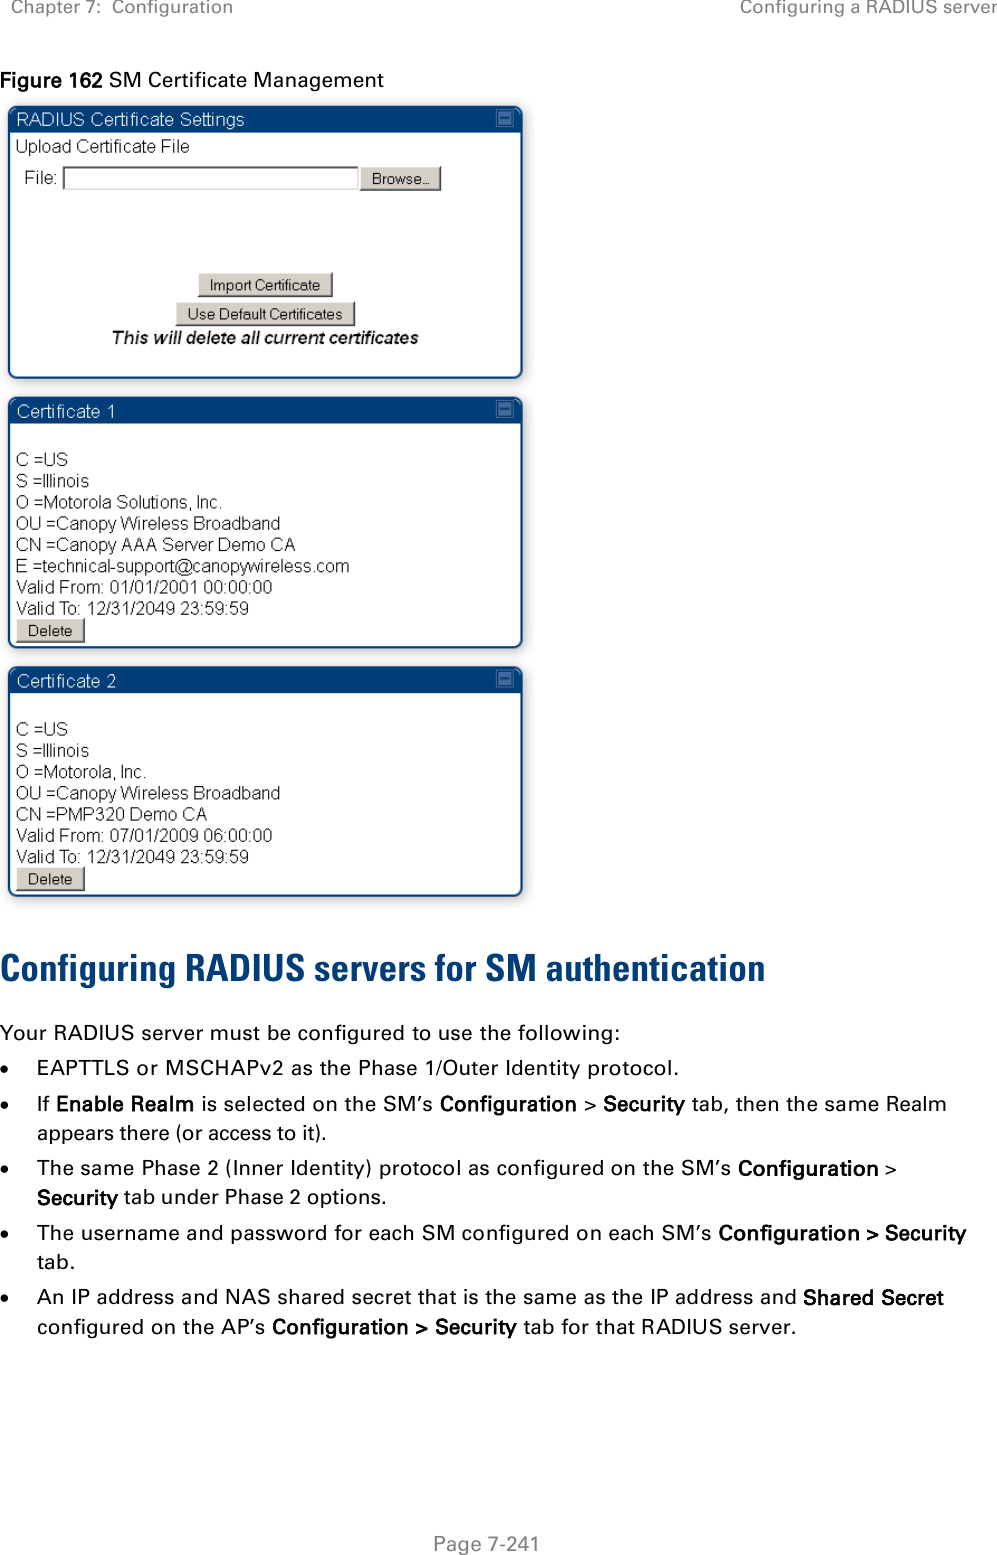 Chapter 7:  Configuration Configuring a RADIUS server   Page 7-241 Figure 162 SM Certificate Management  Configuring RADIUS servers for SM authentication Your RADIUS server must be configured to use the following: • EAPTTLS or MSCHAPv2 as the Phase 1/Outer Identity protocol. • If Enable Realm is selected on the SM’s Configuration &gt; Security tab, then the same Realm appears there (or access to it). • The same Phase 2 (Inner Identity) protocol as configured on the SM’s Configuration &gt; Security tab under Phase 2 options. • The username and password for each SM configured on each SM’s Configuration &gt; Security tab. • An IP address and NAS shared secret that is the same as the IP address and Shared Secret configured on the AP’s Configuration &gt; Security tab for that RADIUS server. 